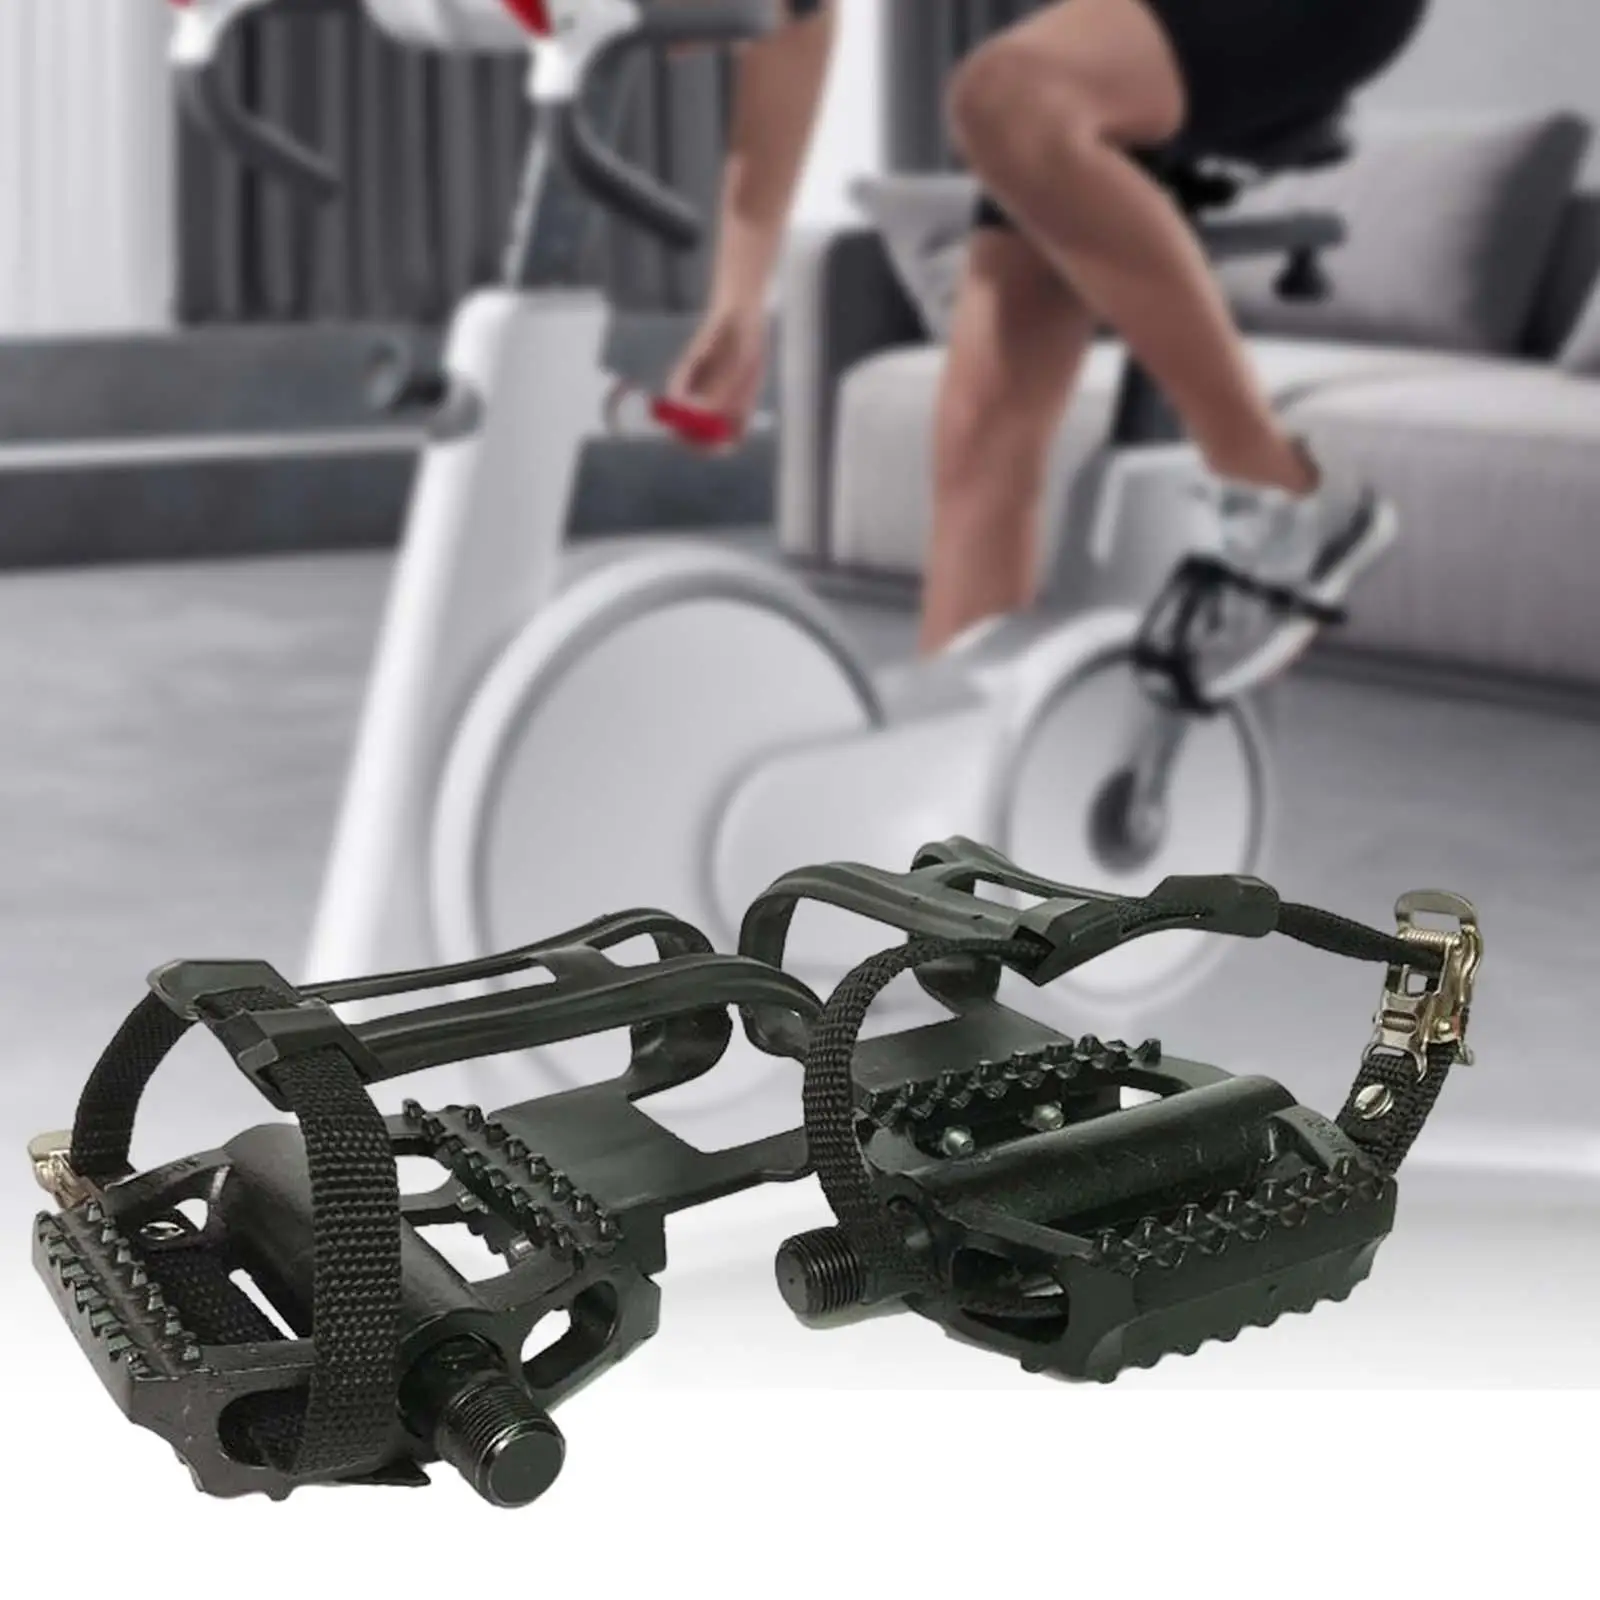 1 Pair Exercise Bike Pedals with Adjustable Straps 18mm Axle with Toe Cages for Cycling Gym Indoor Accessories Replacement